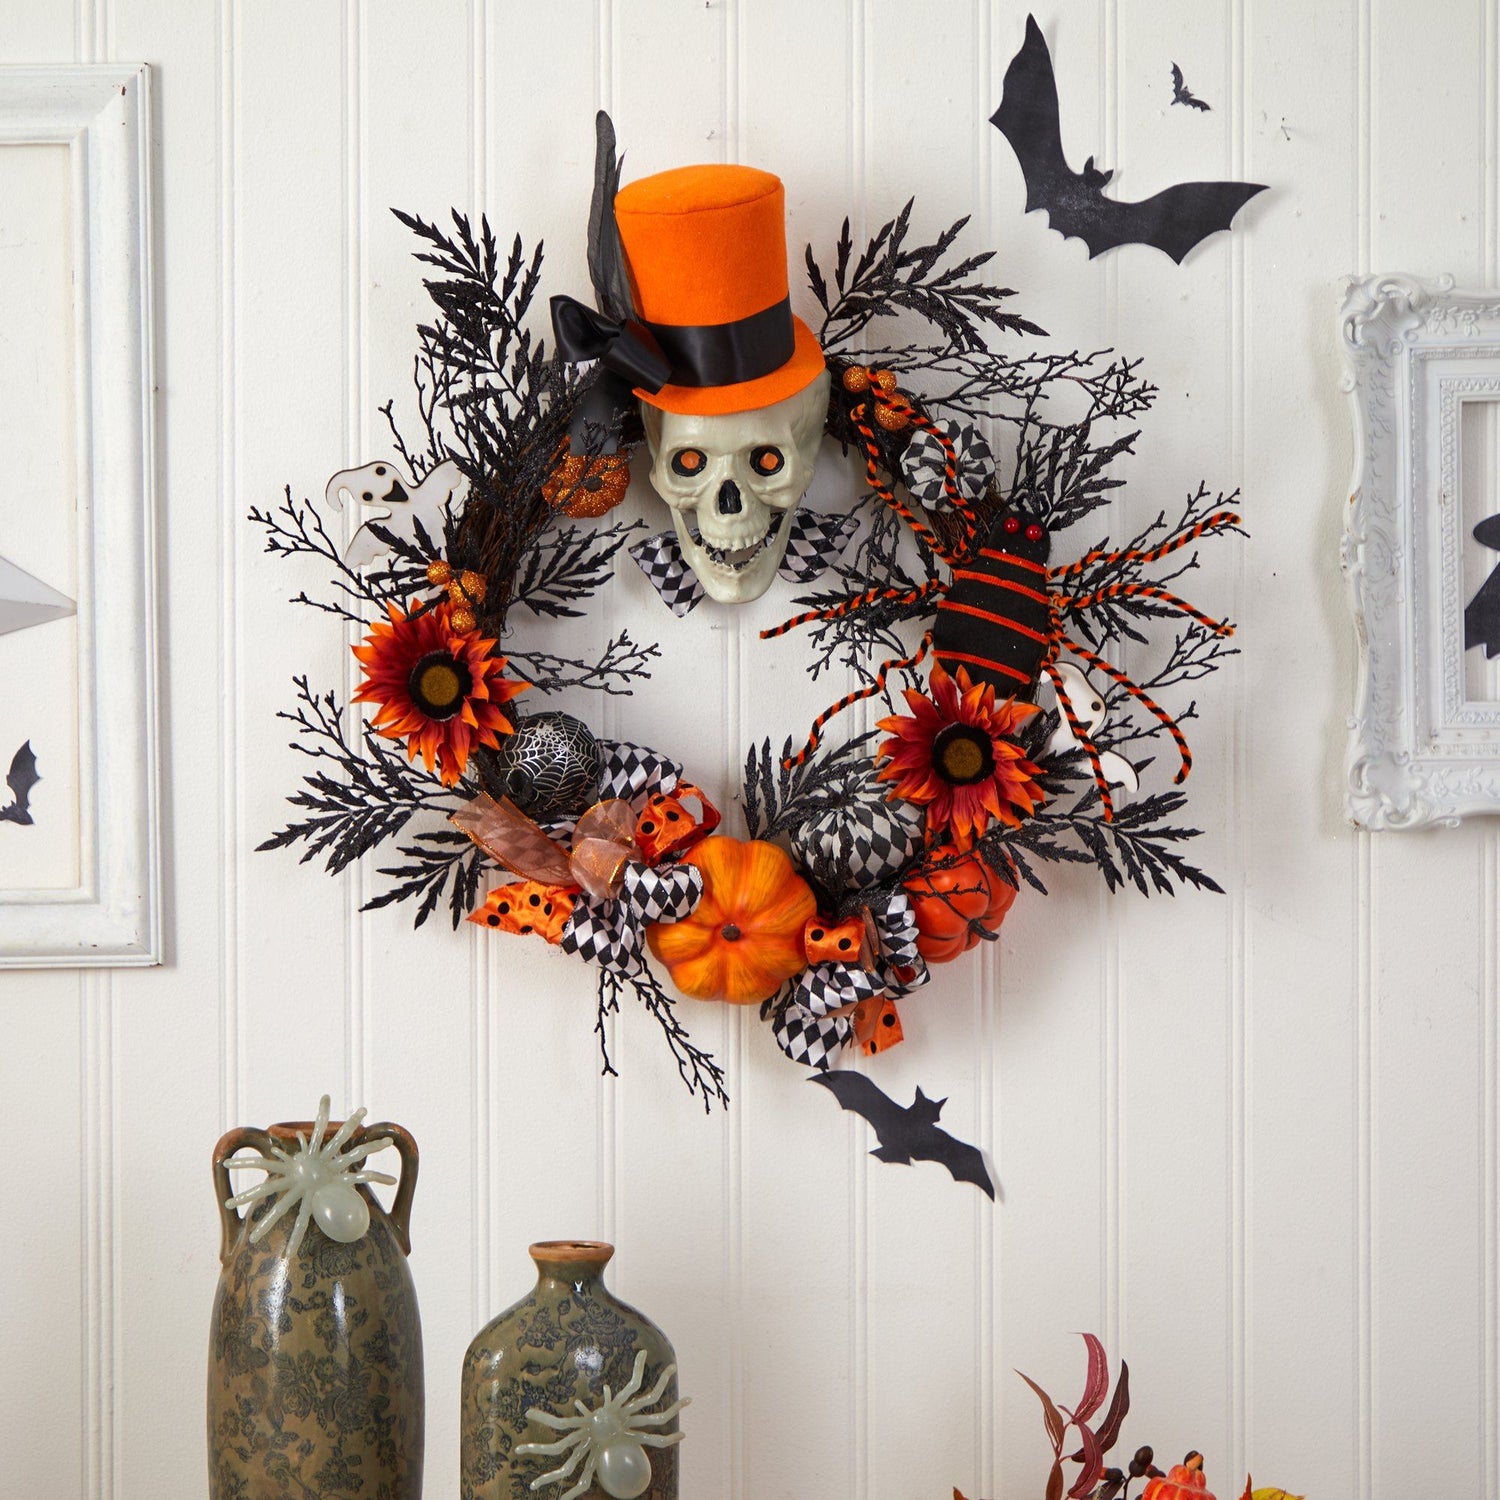 30” Spider and Skull with Top Hat Halloween Wreath